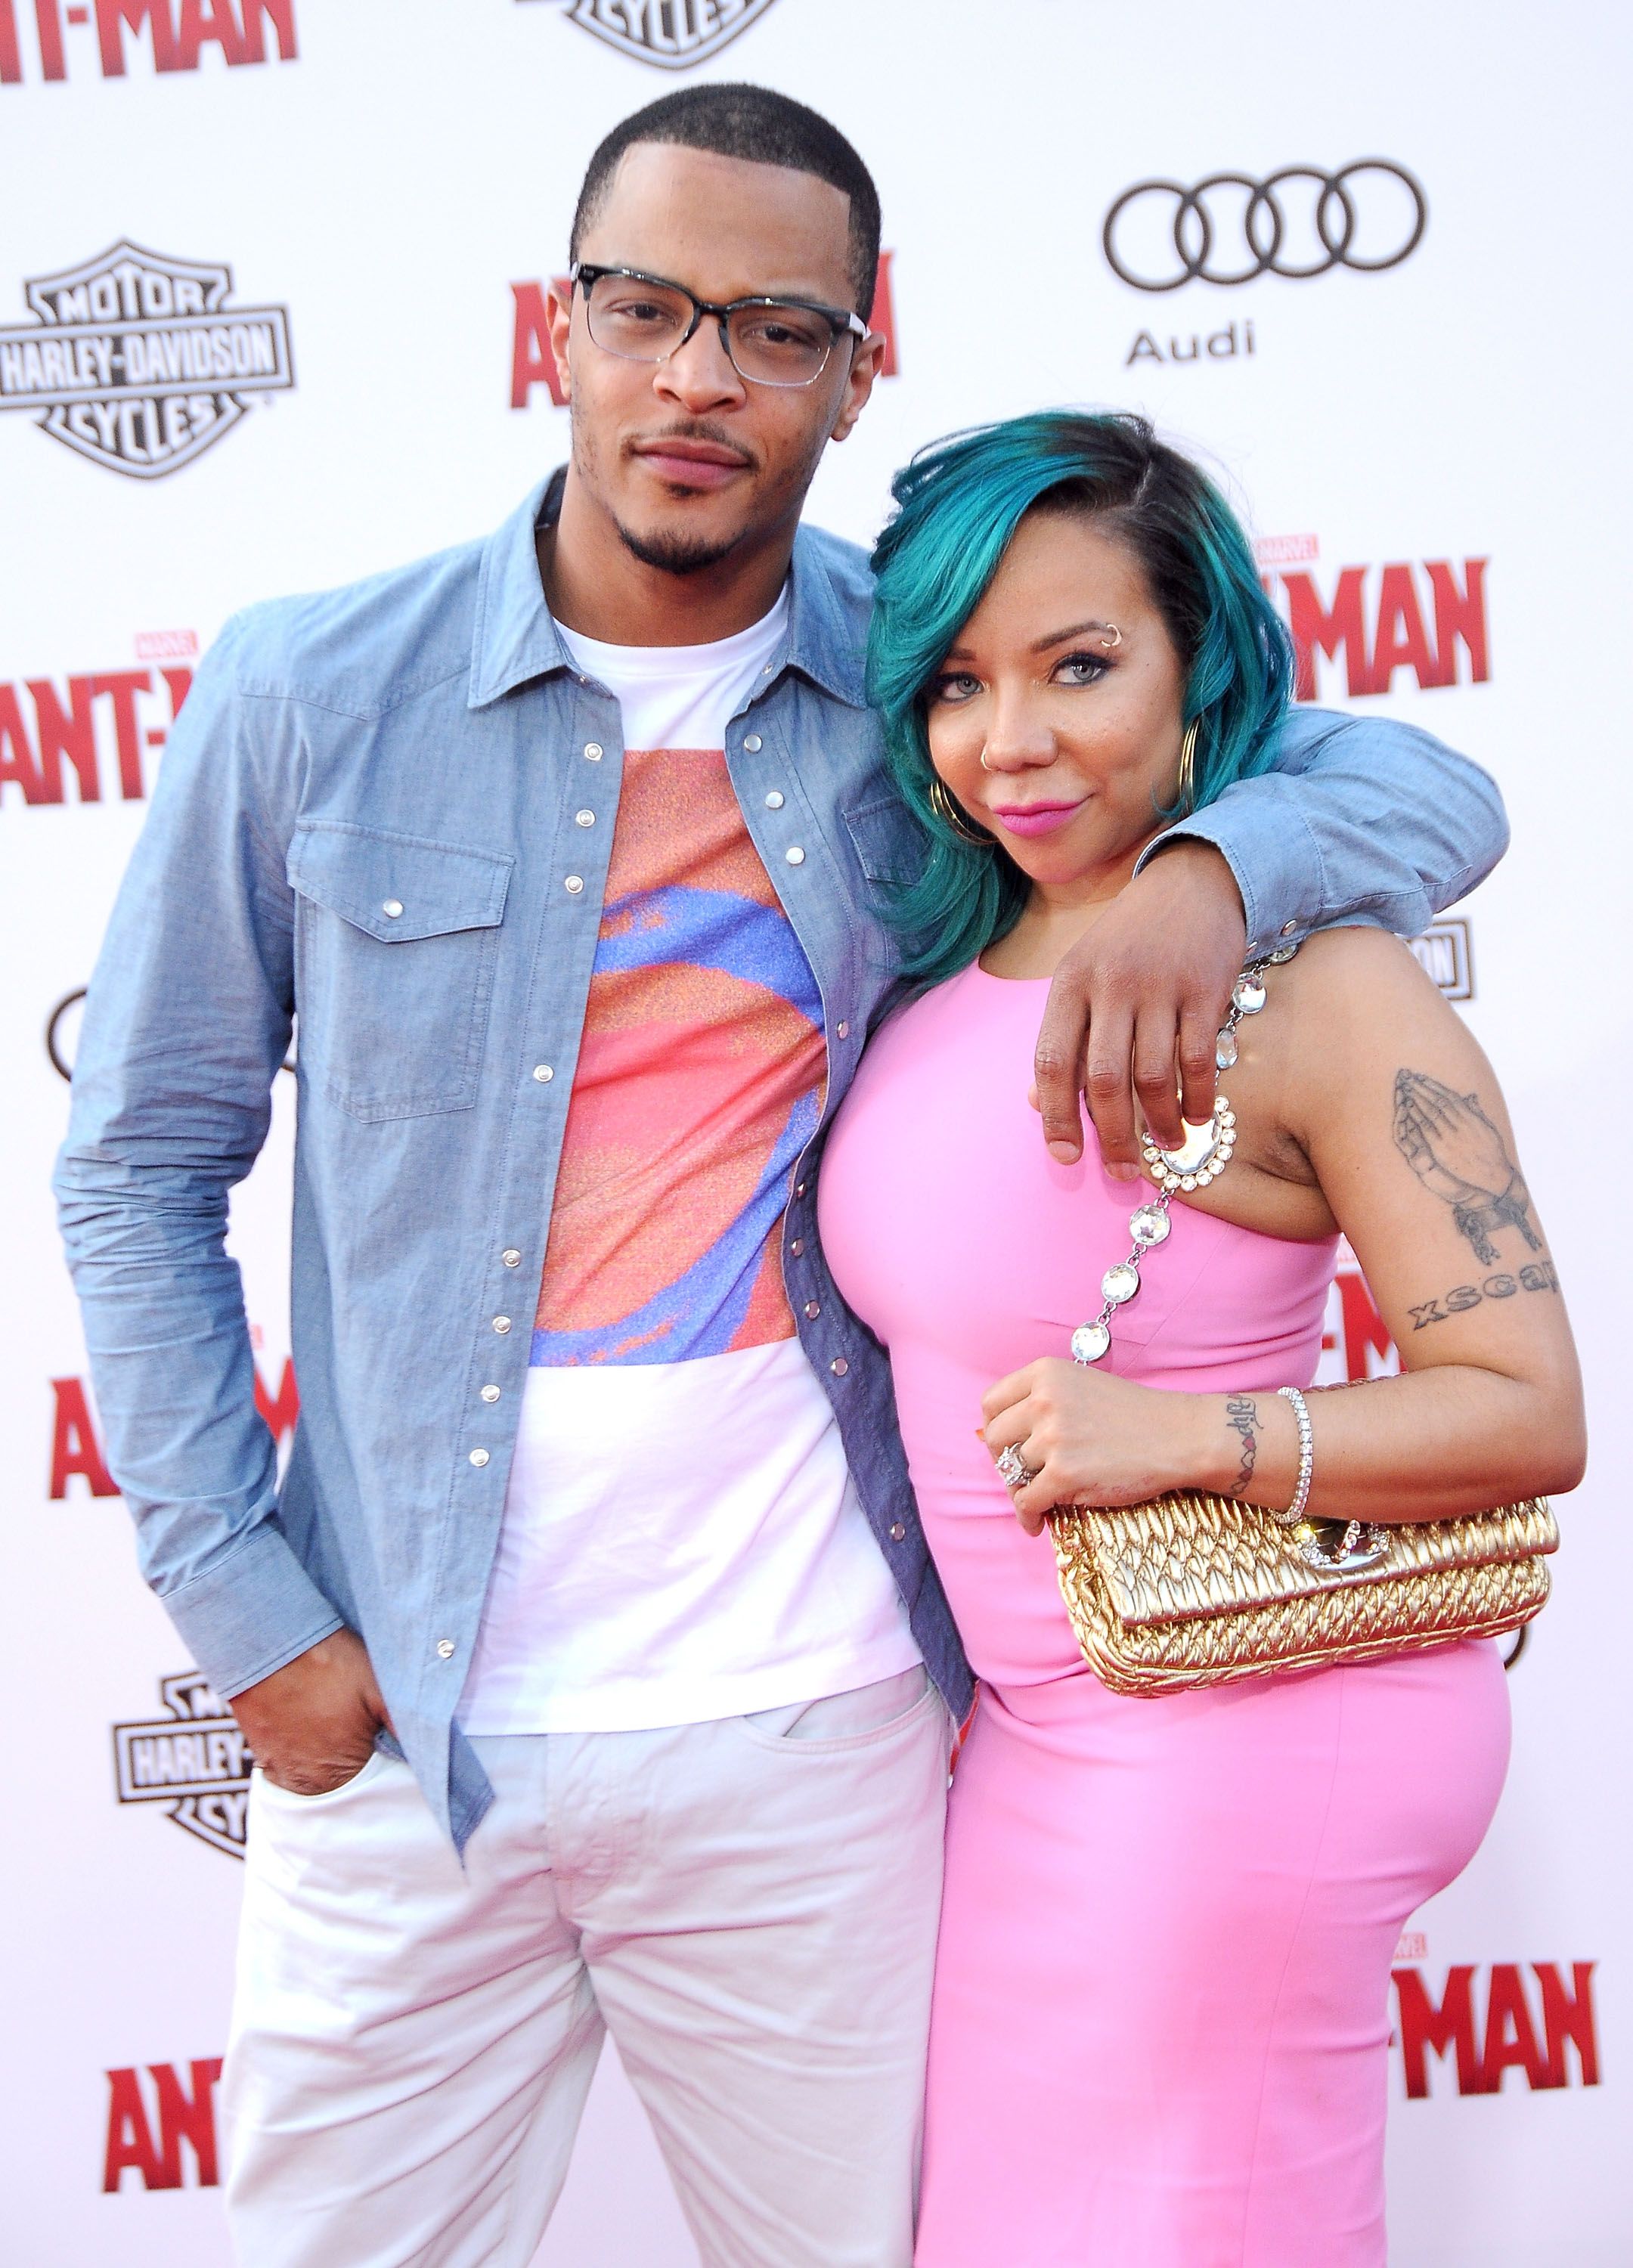 Power couple Tameka "Tiny" Harris and rapper-actor T.I. attend the 2015 premiere of the Marvel movie "Ant-Man" in Hollywood, California. | Photo: Getty Images